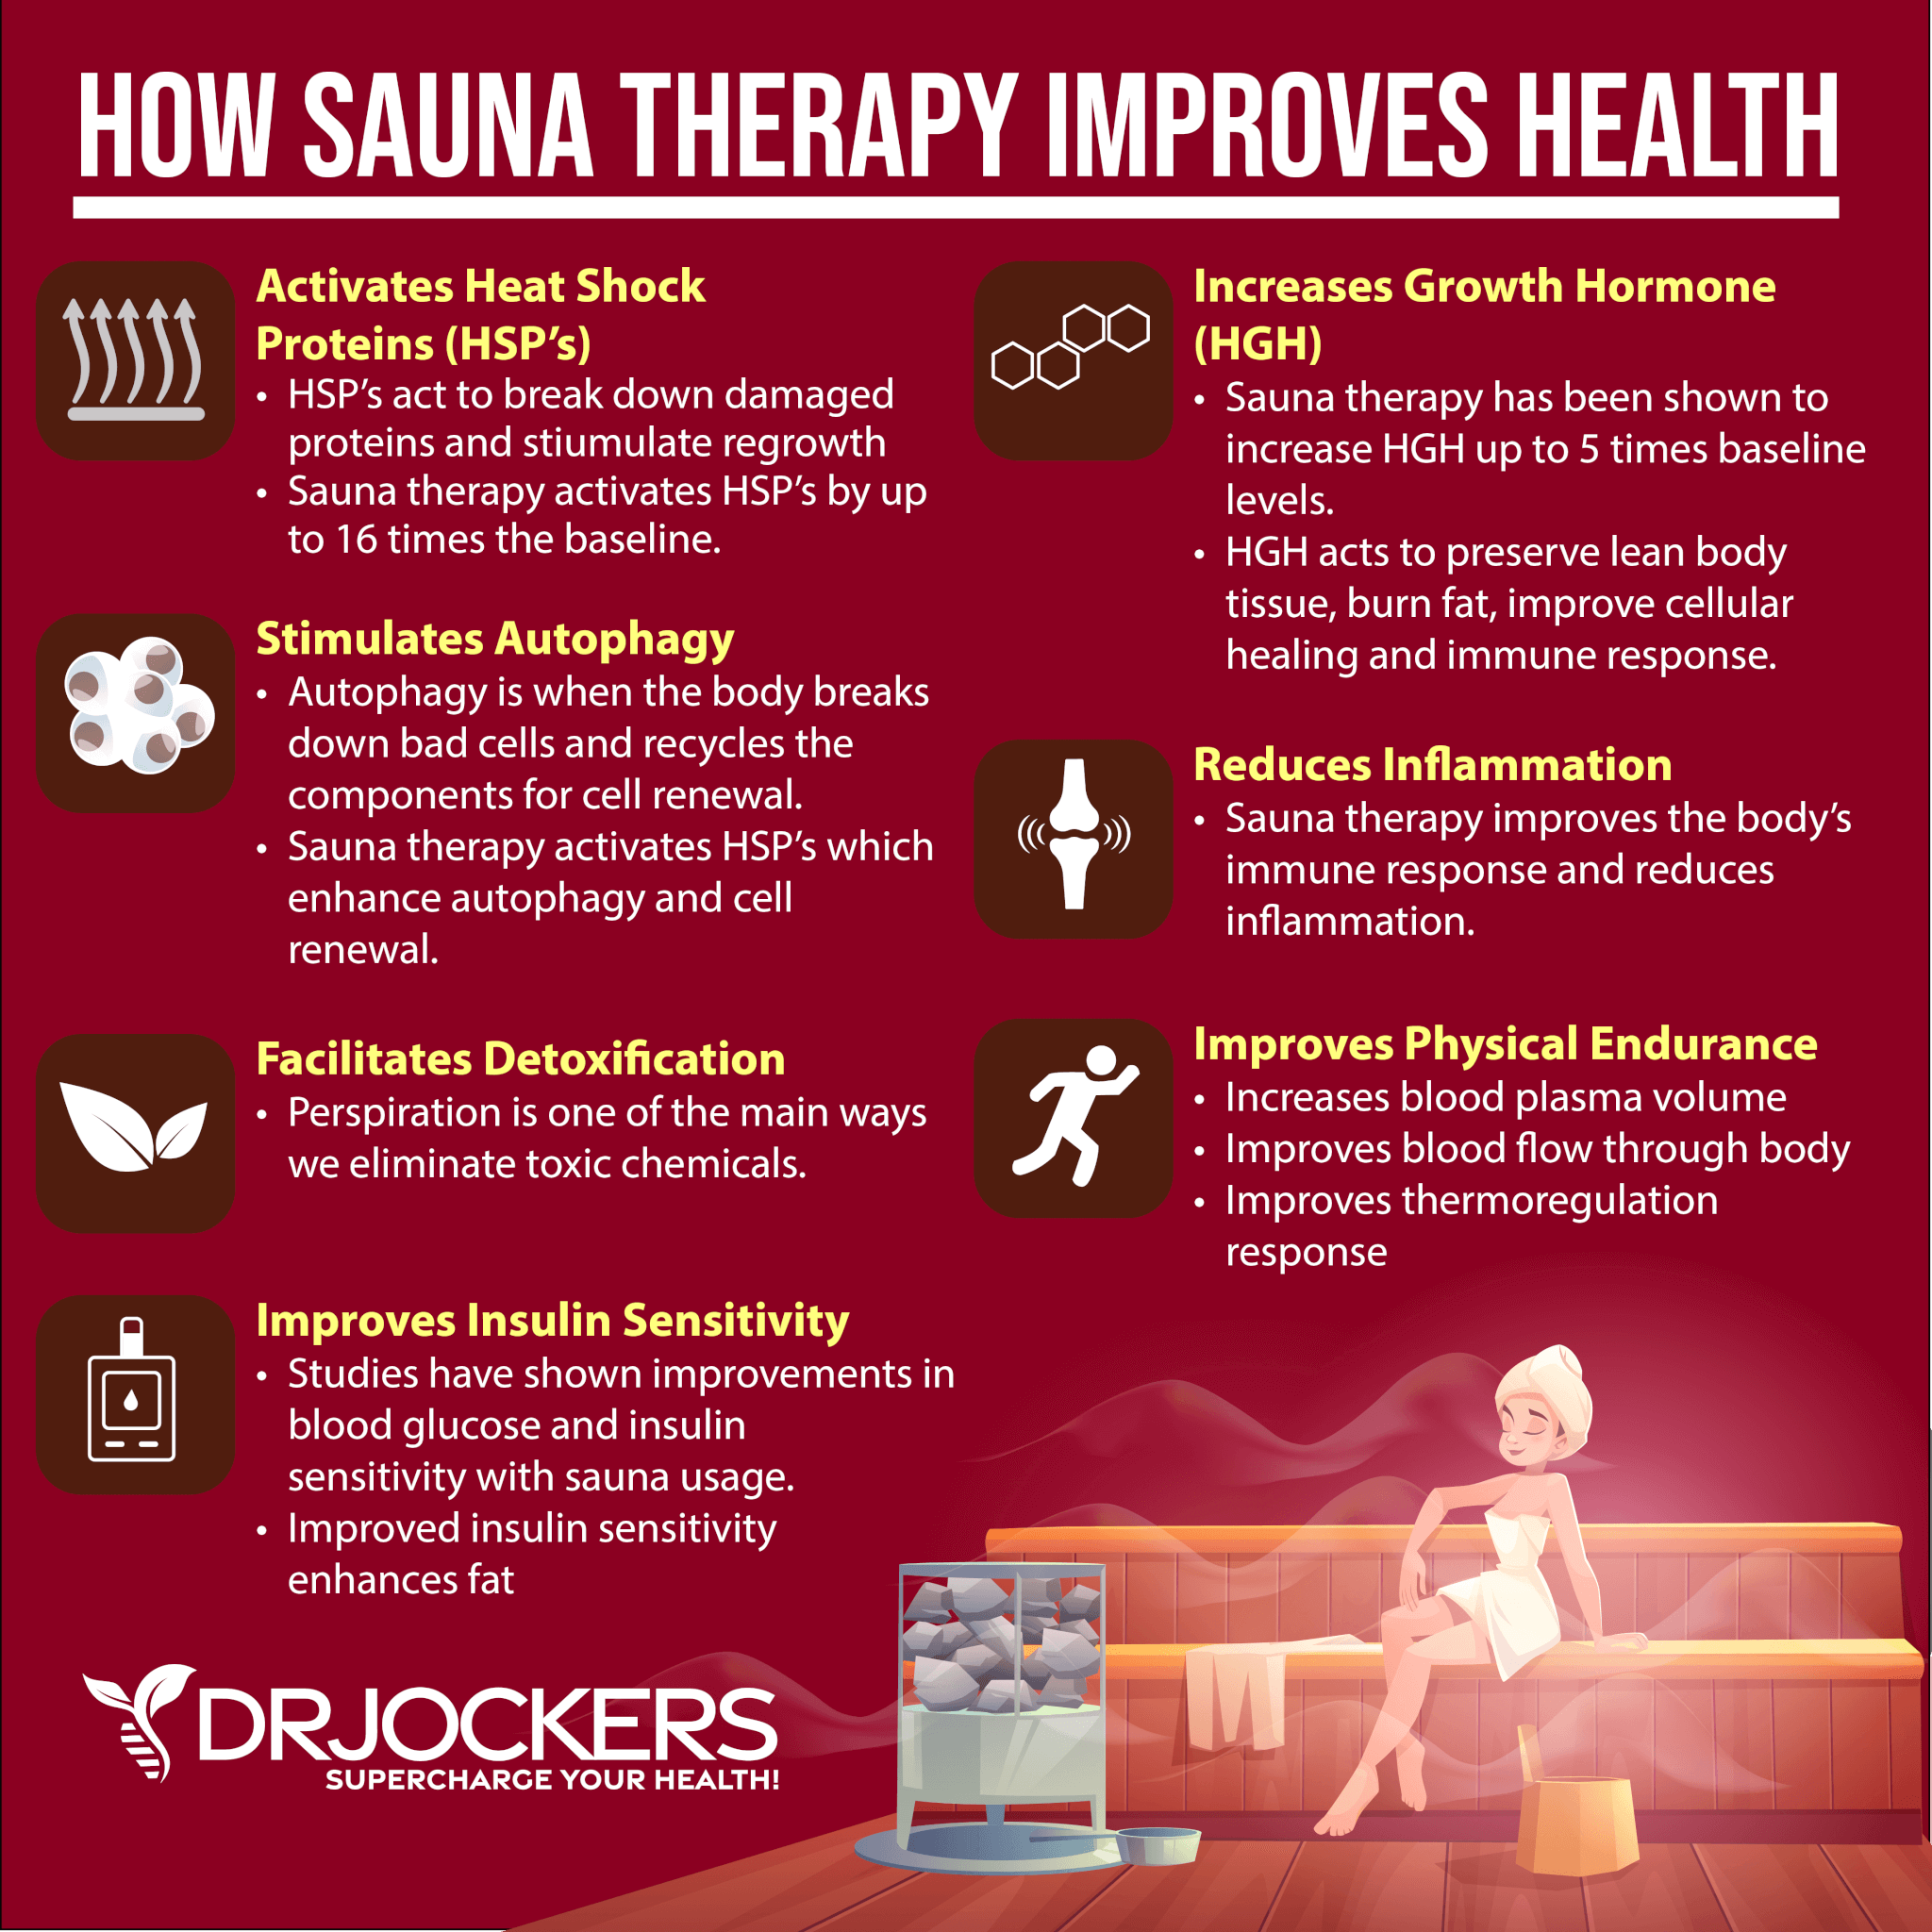 infrared sauna, Infrared Sauna Therapy For Immune and Detox Support